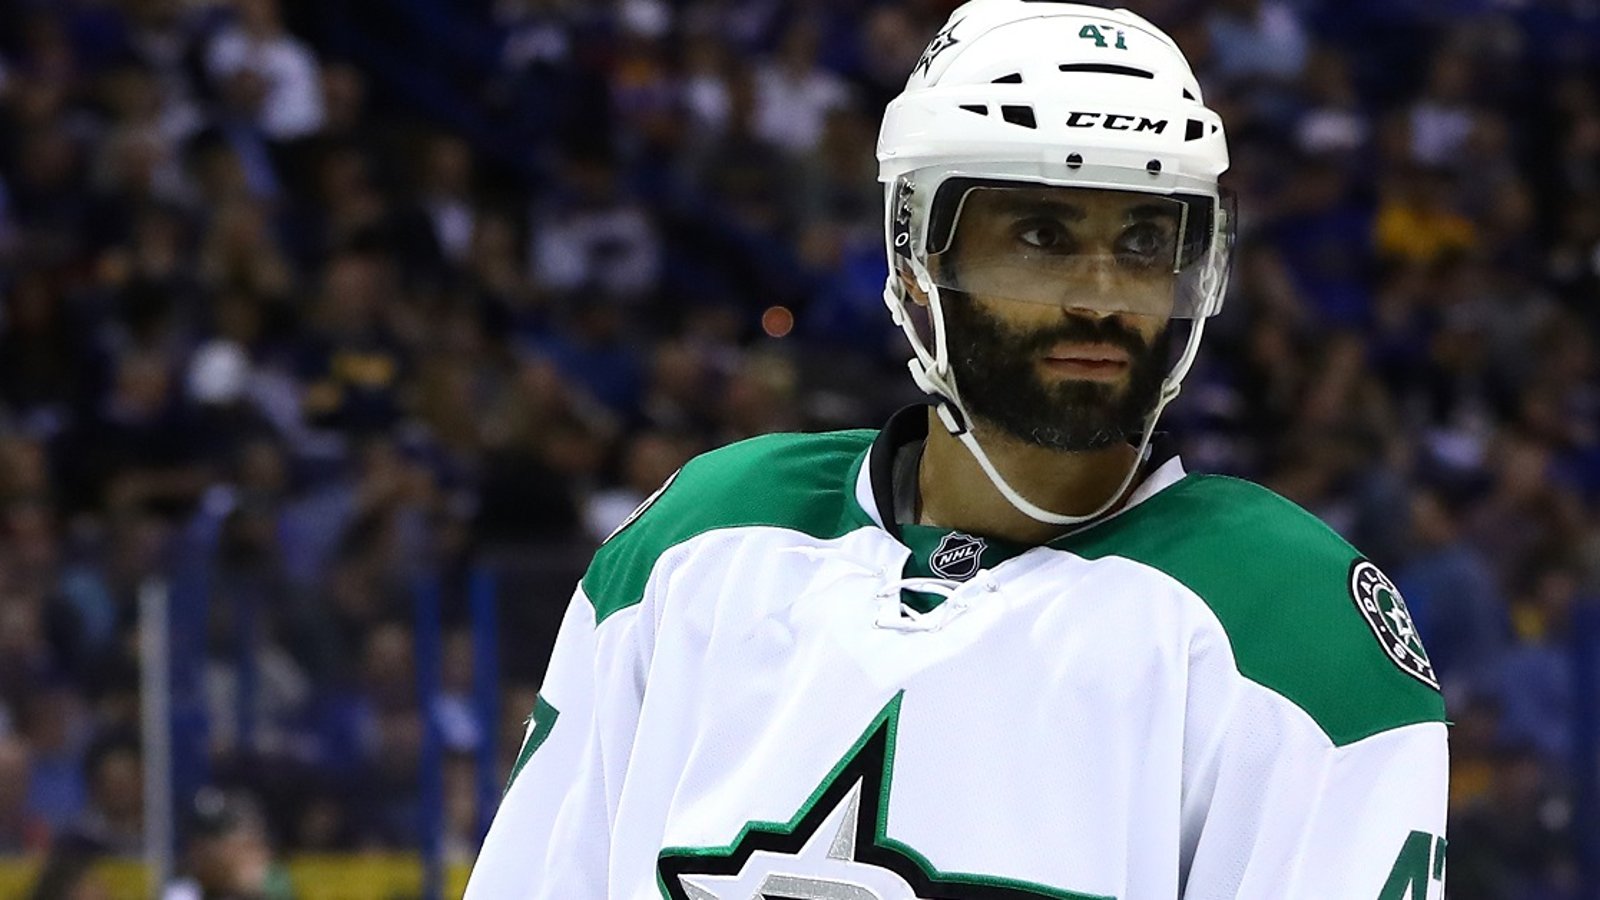 Report: Stars' defenseman out after re-aggravating injury.